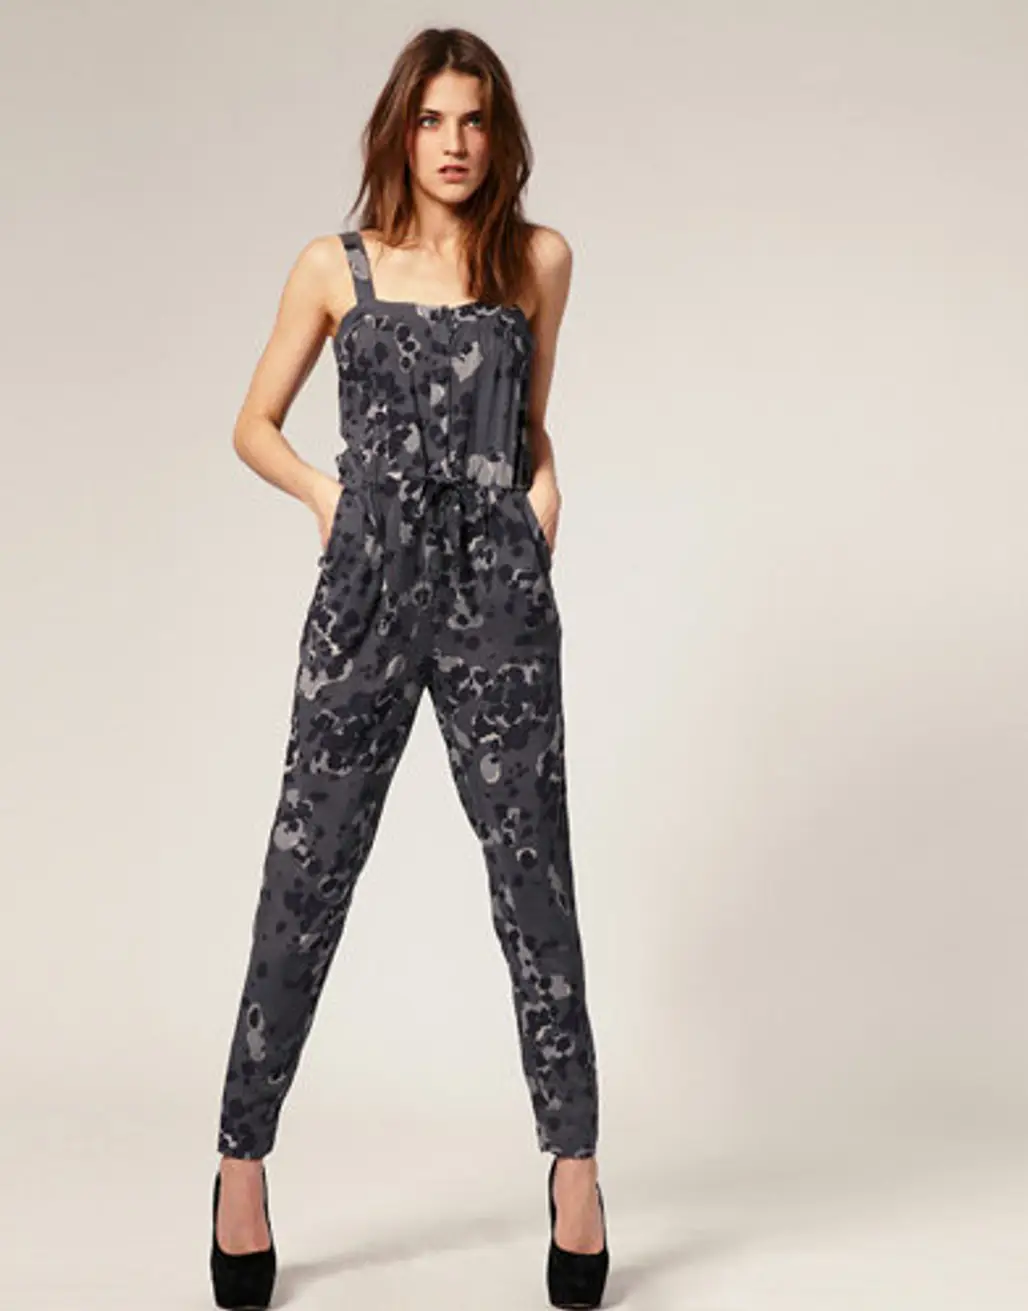 Blurred Animal Print Jumpsuit by Warehouse